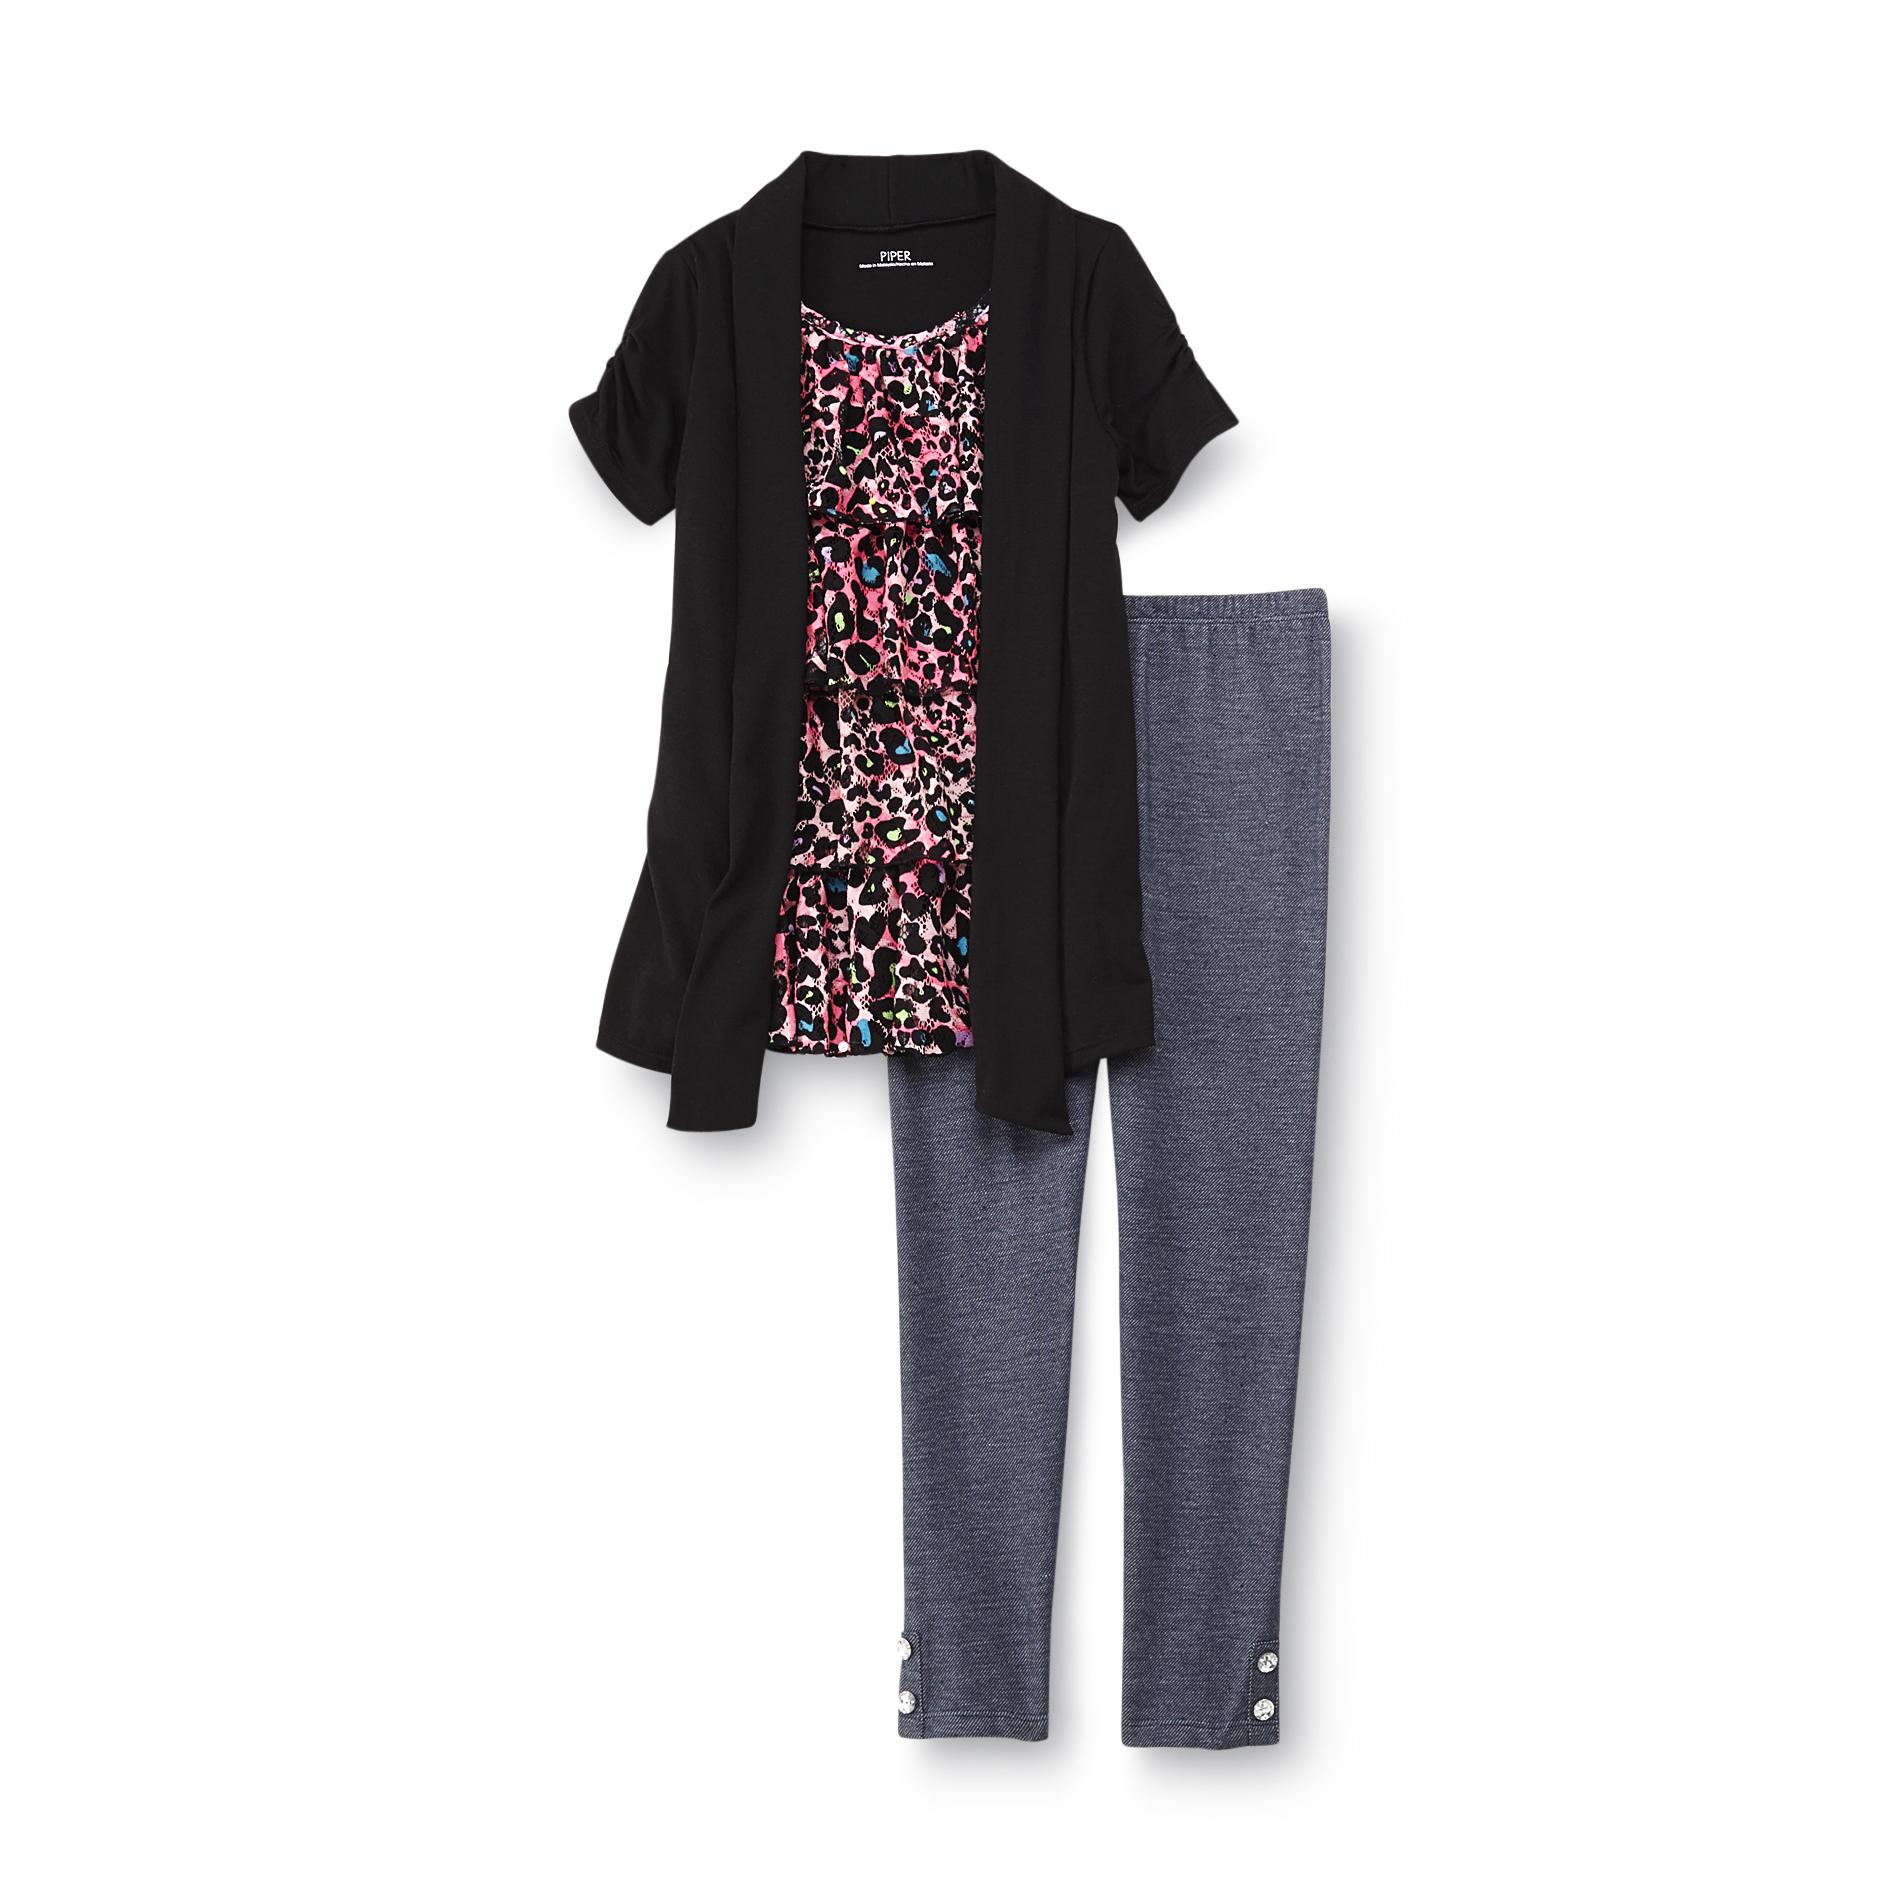 Piper Girl's Layered-Look Top & Jeggings - Leopard Print